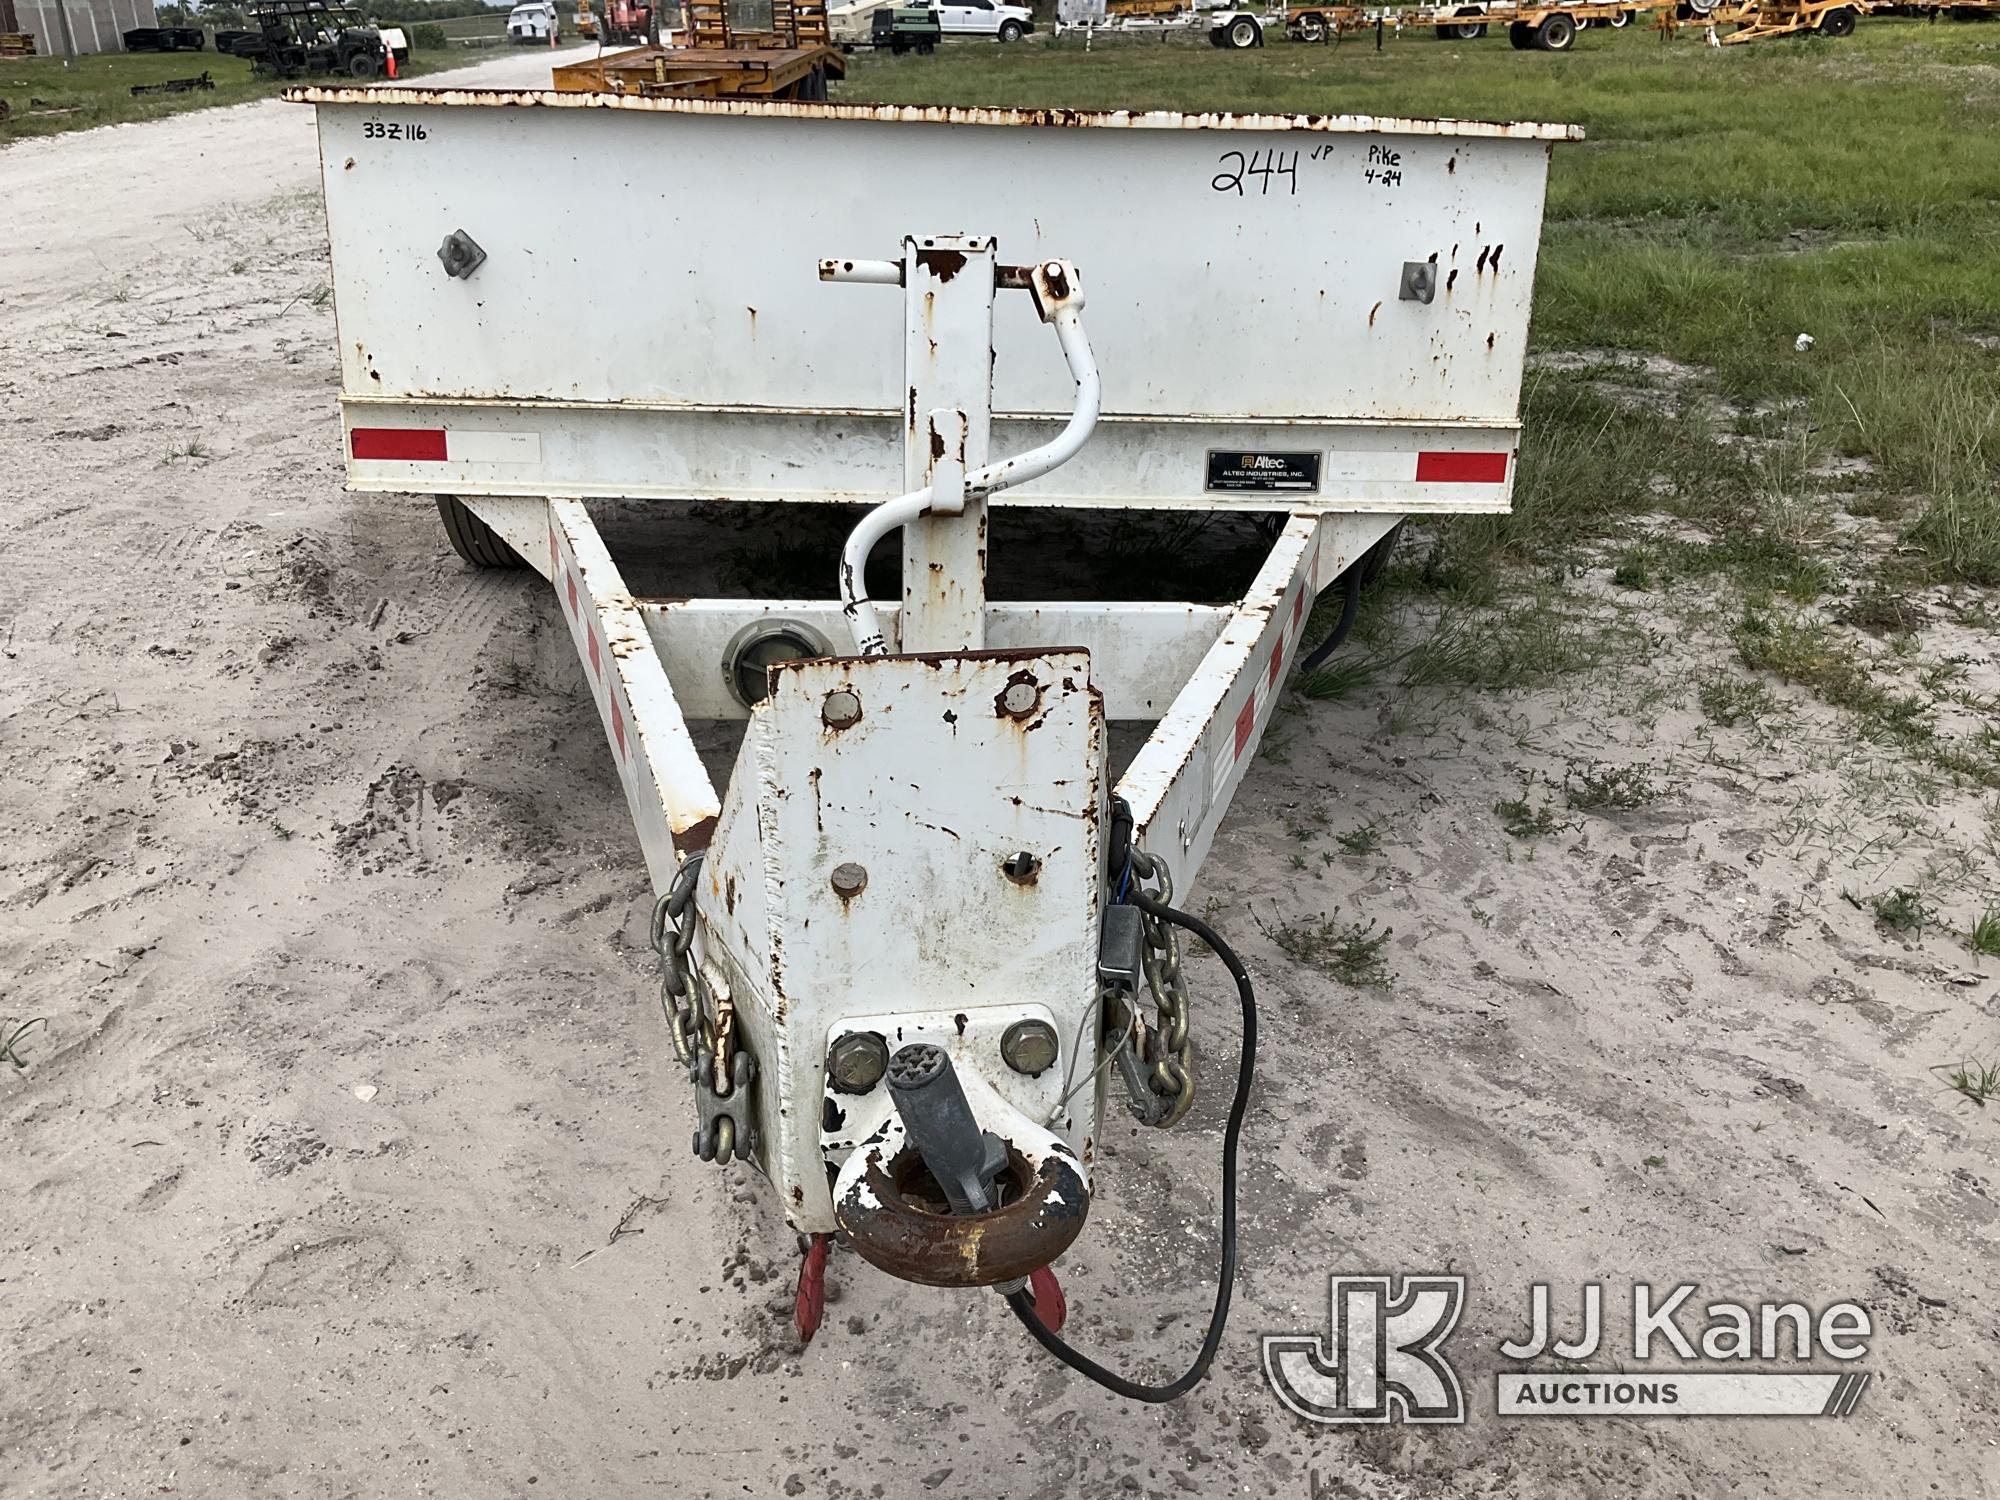 (Westlake, FL) 2016 Altec S/A Material Trailer Towable, Body Damage & Rust) (FL Residents Purchasing